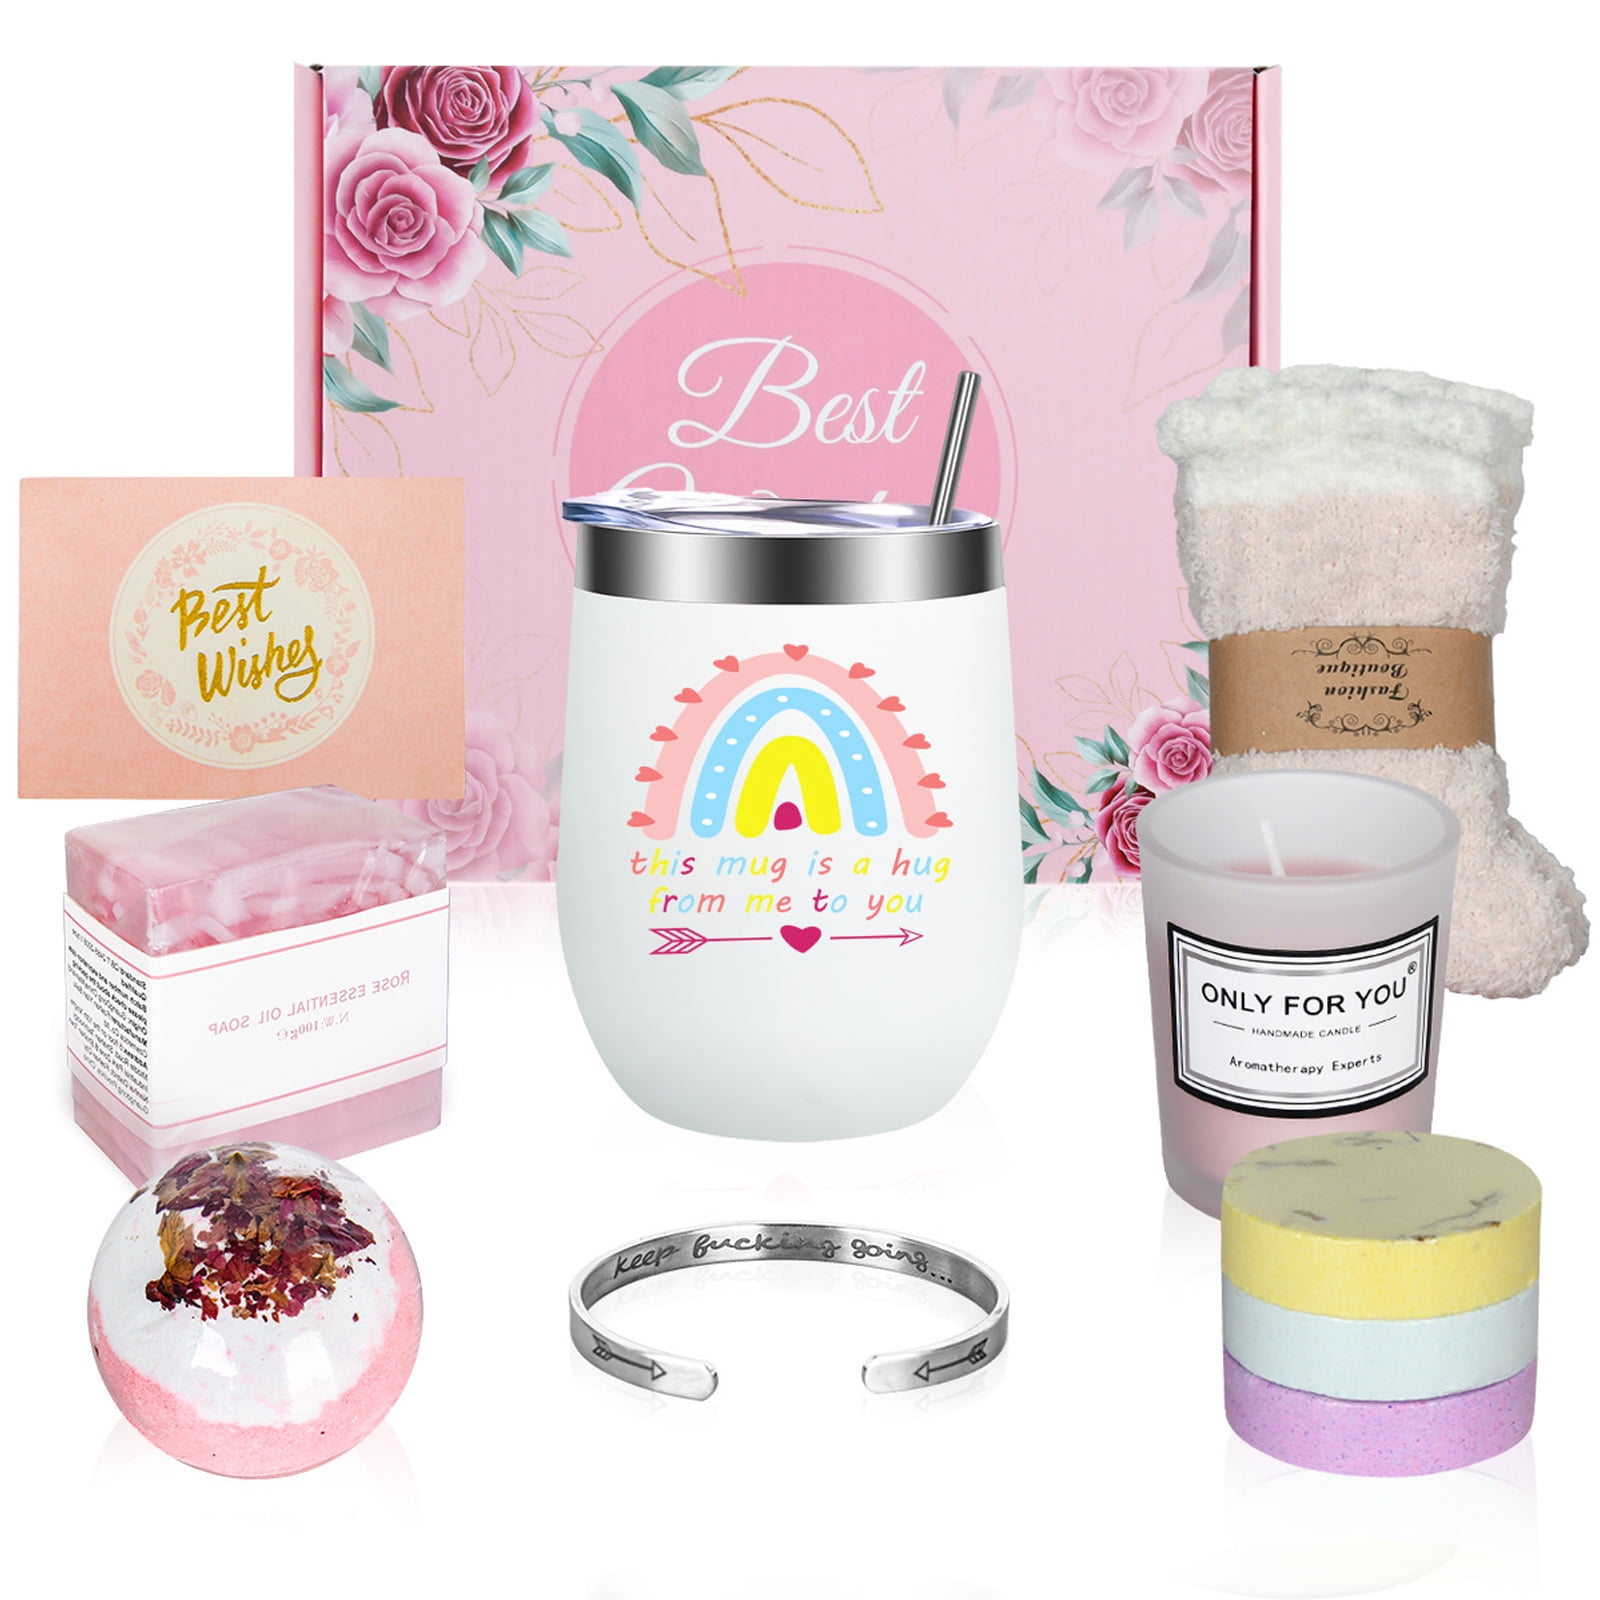 Hgsoor Spa Gifts for Women - Spa Gift Set for Women Friends